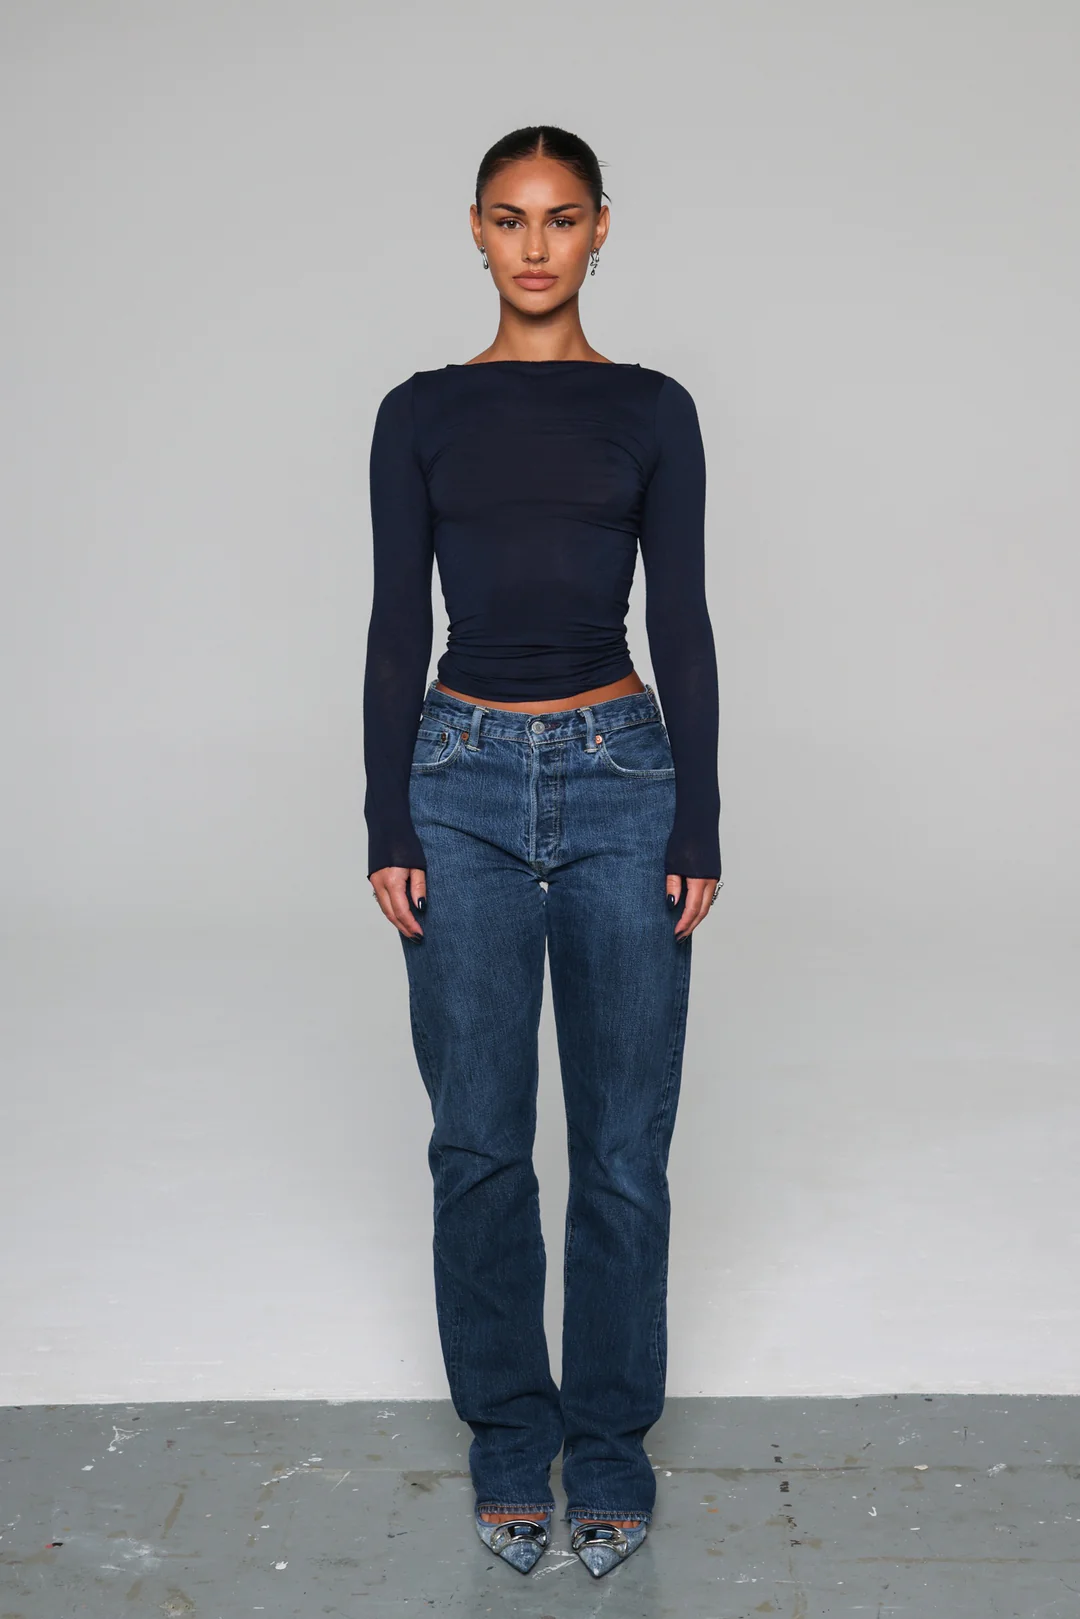 Levi’s Jeans: Classic and Timeless Denim Options